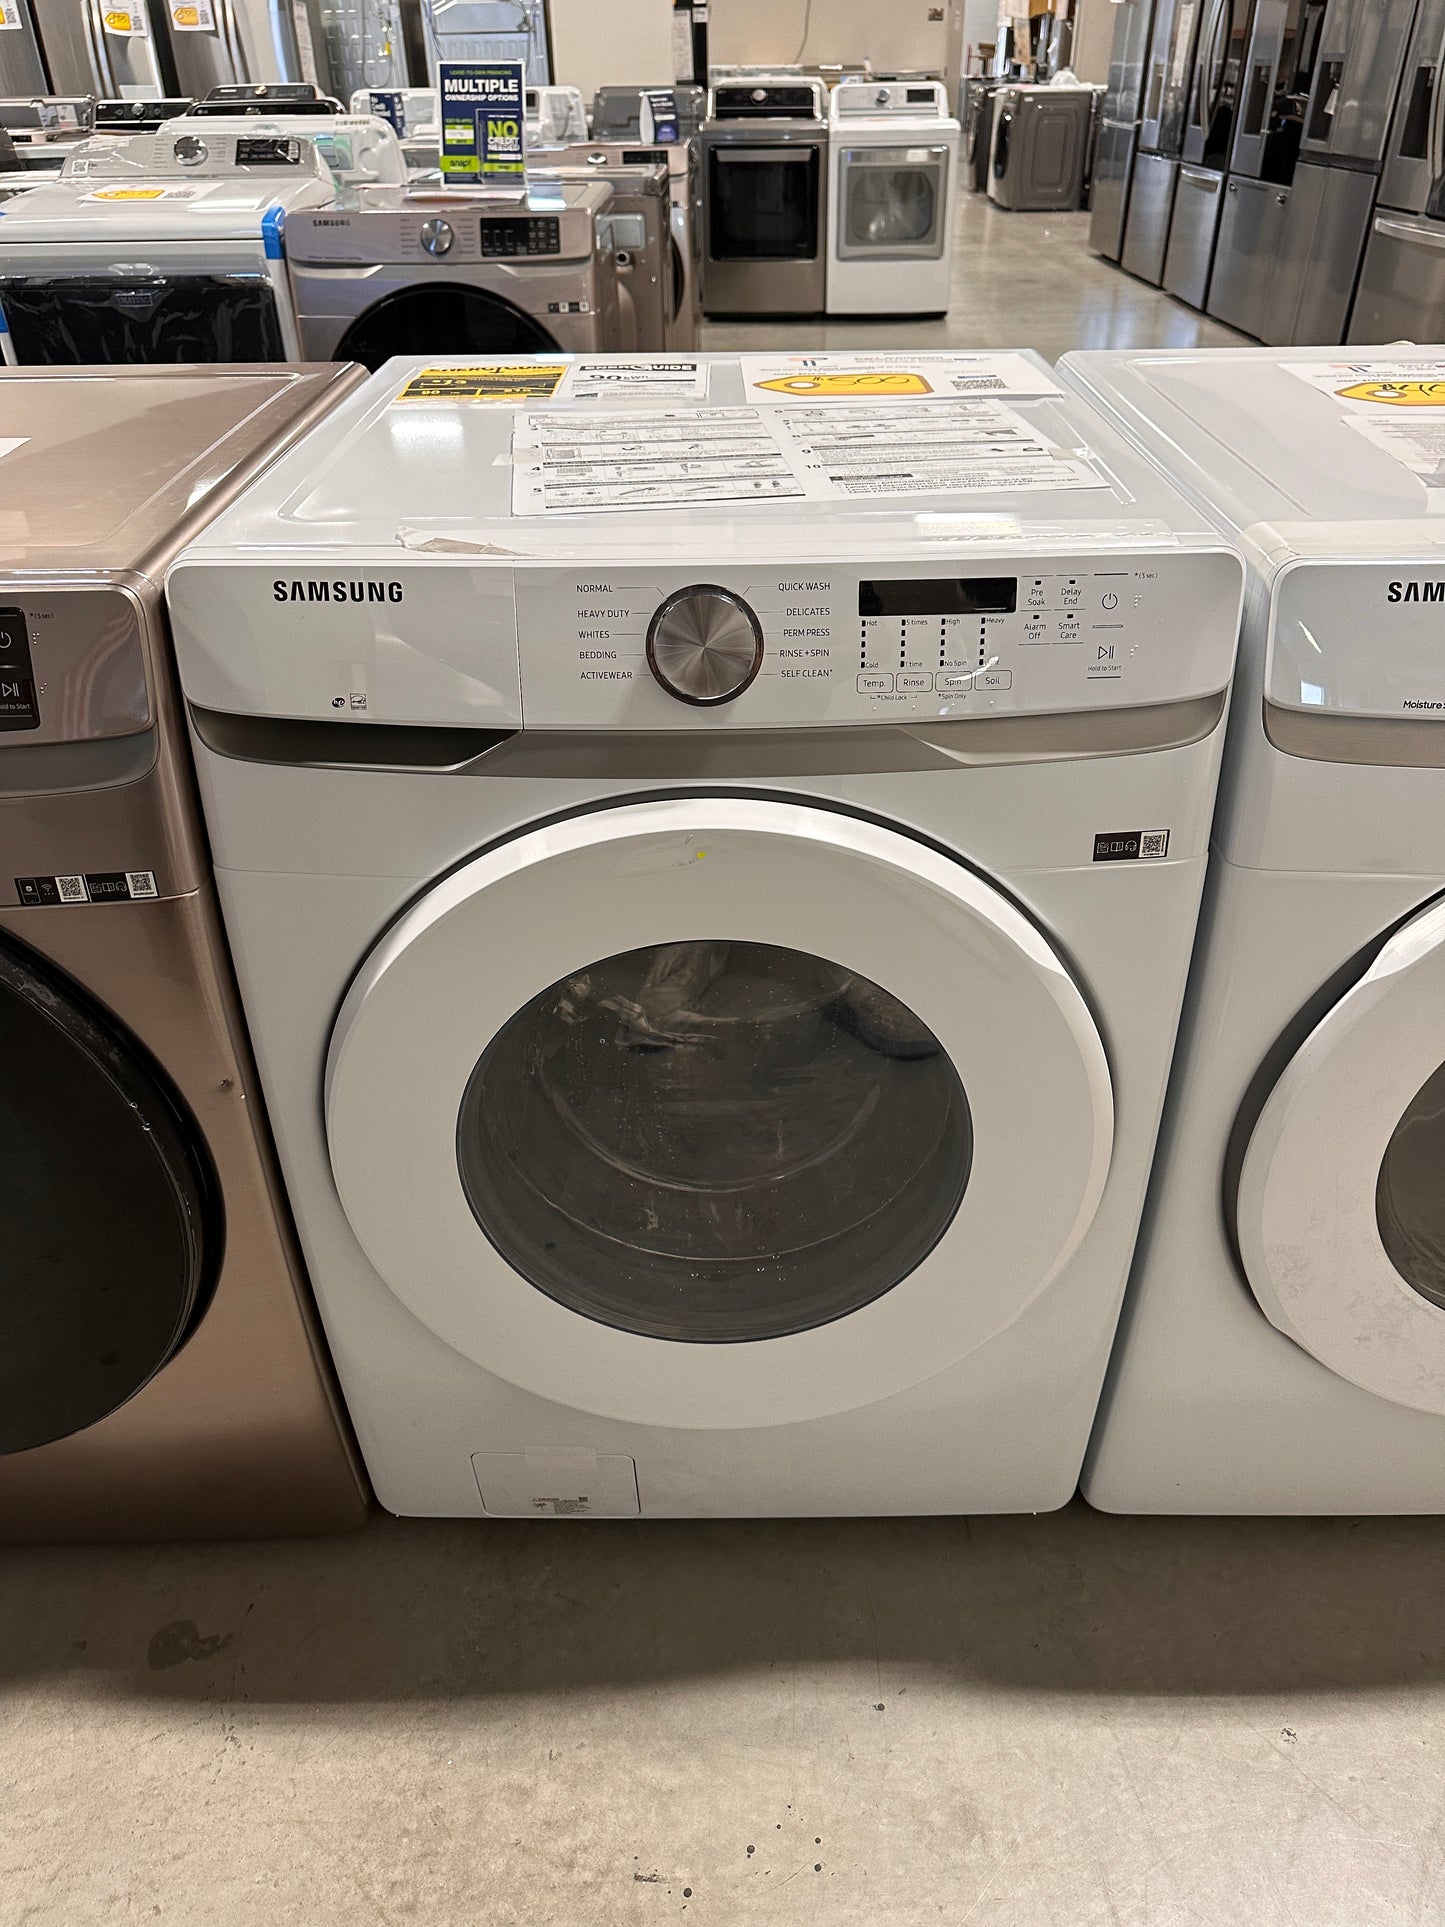 SAMSUNG STACKABLE FRONT LOAD WASHING MACHINE MODEL: WF45T6000AW/A5  WAS13142